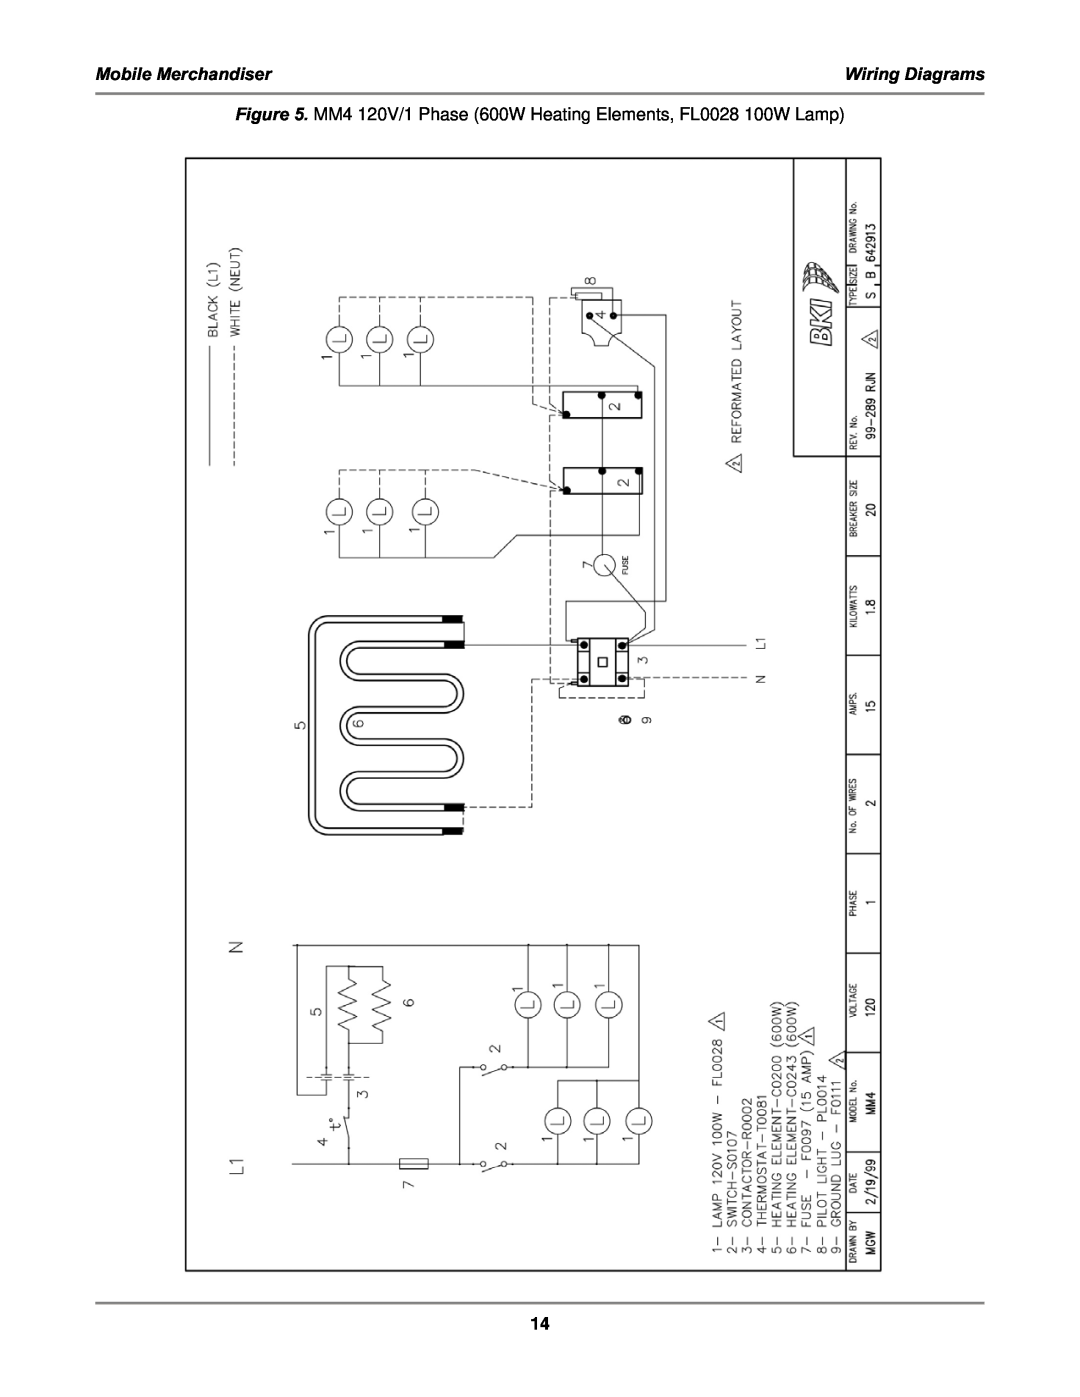 Bakers Pride Oven MM4, MM6 service manual Mobile Merchandiser, Wiring Diagrams 